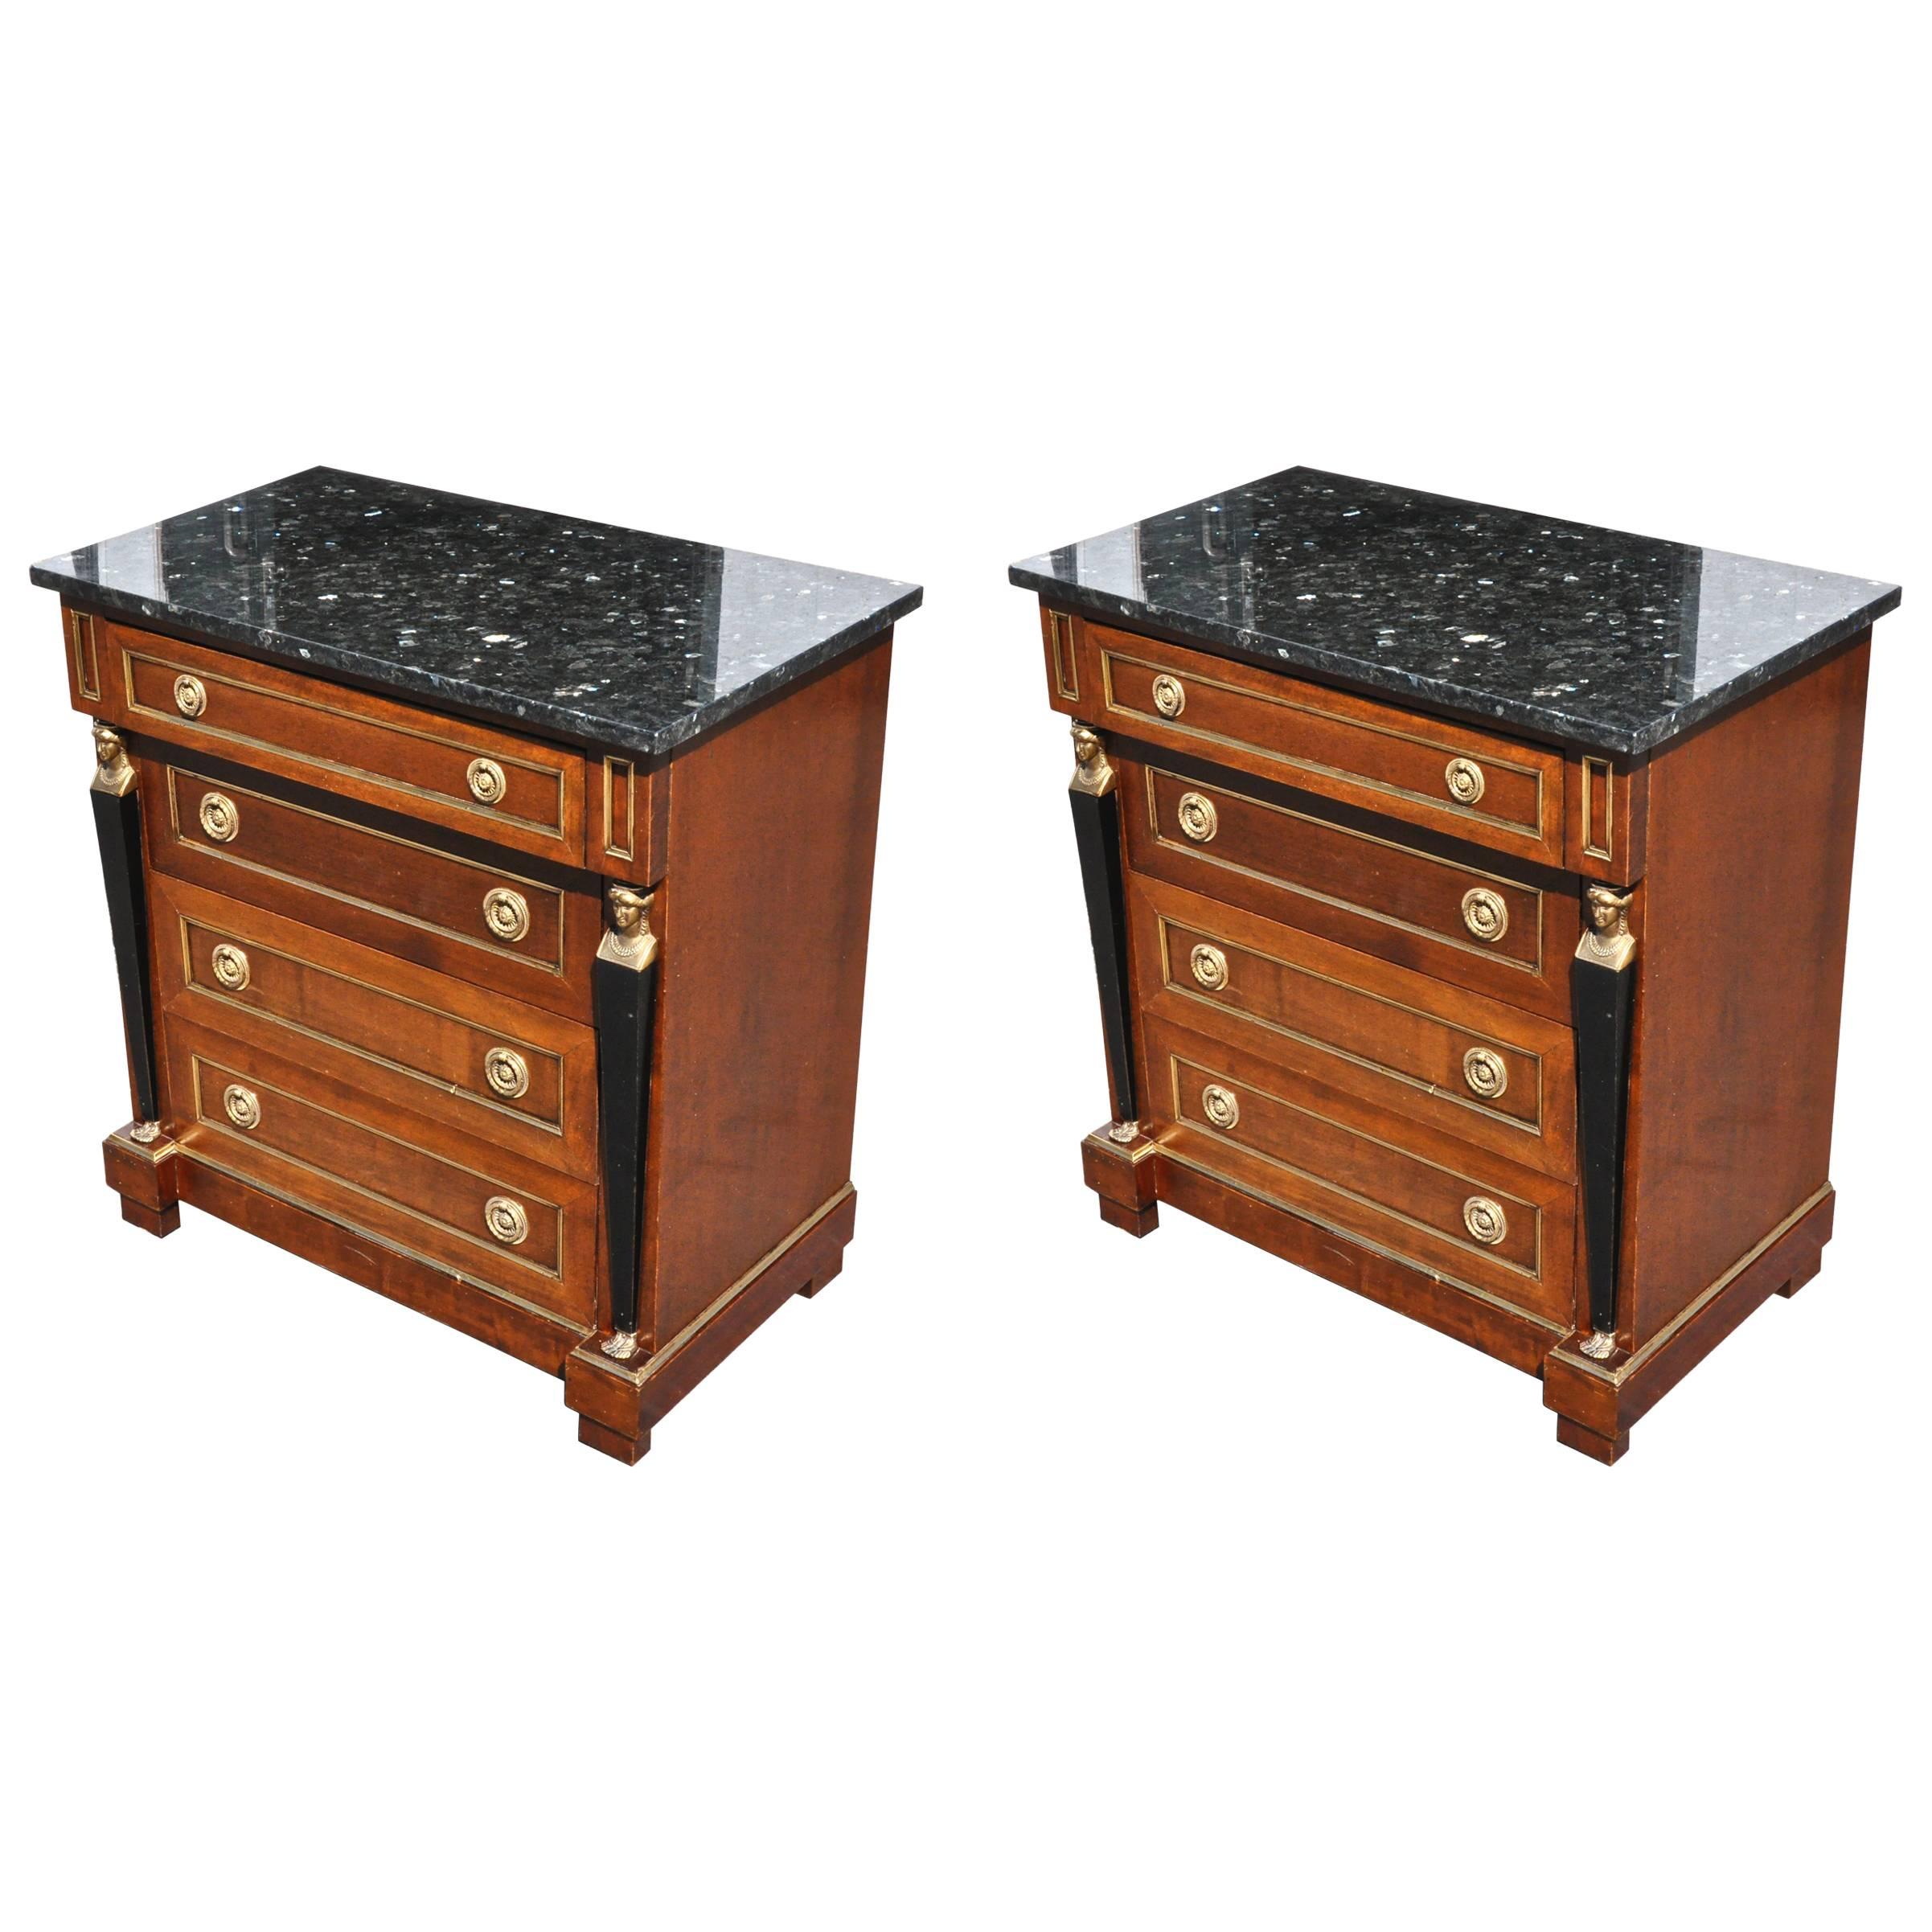 Pair of French Empire Style Mahogany Small Bedside Commodes or Chests